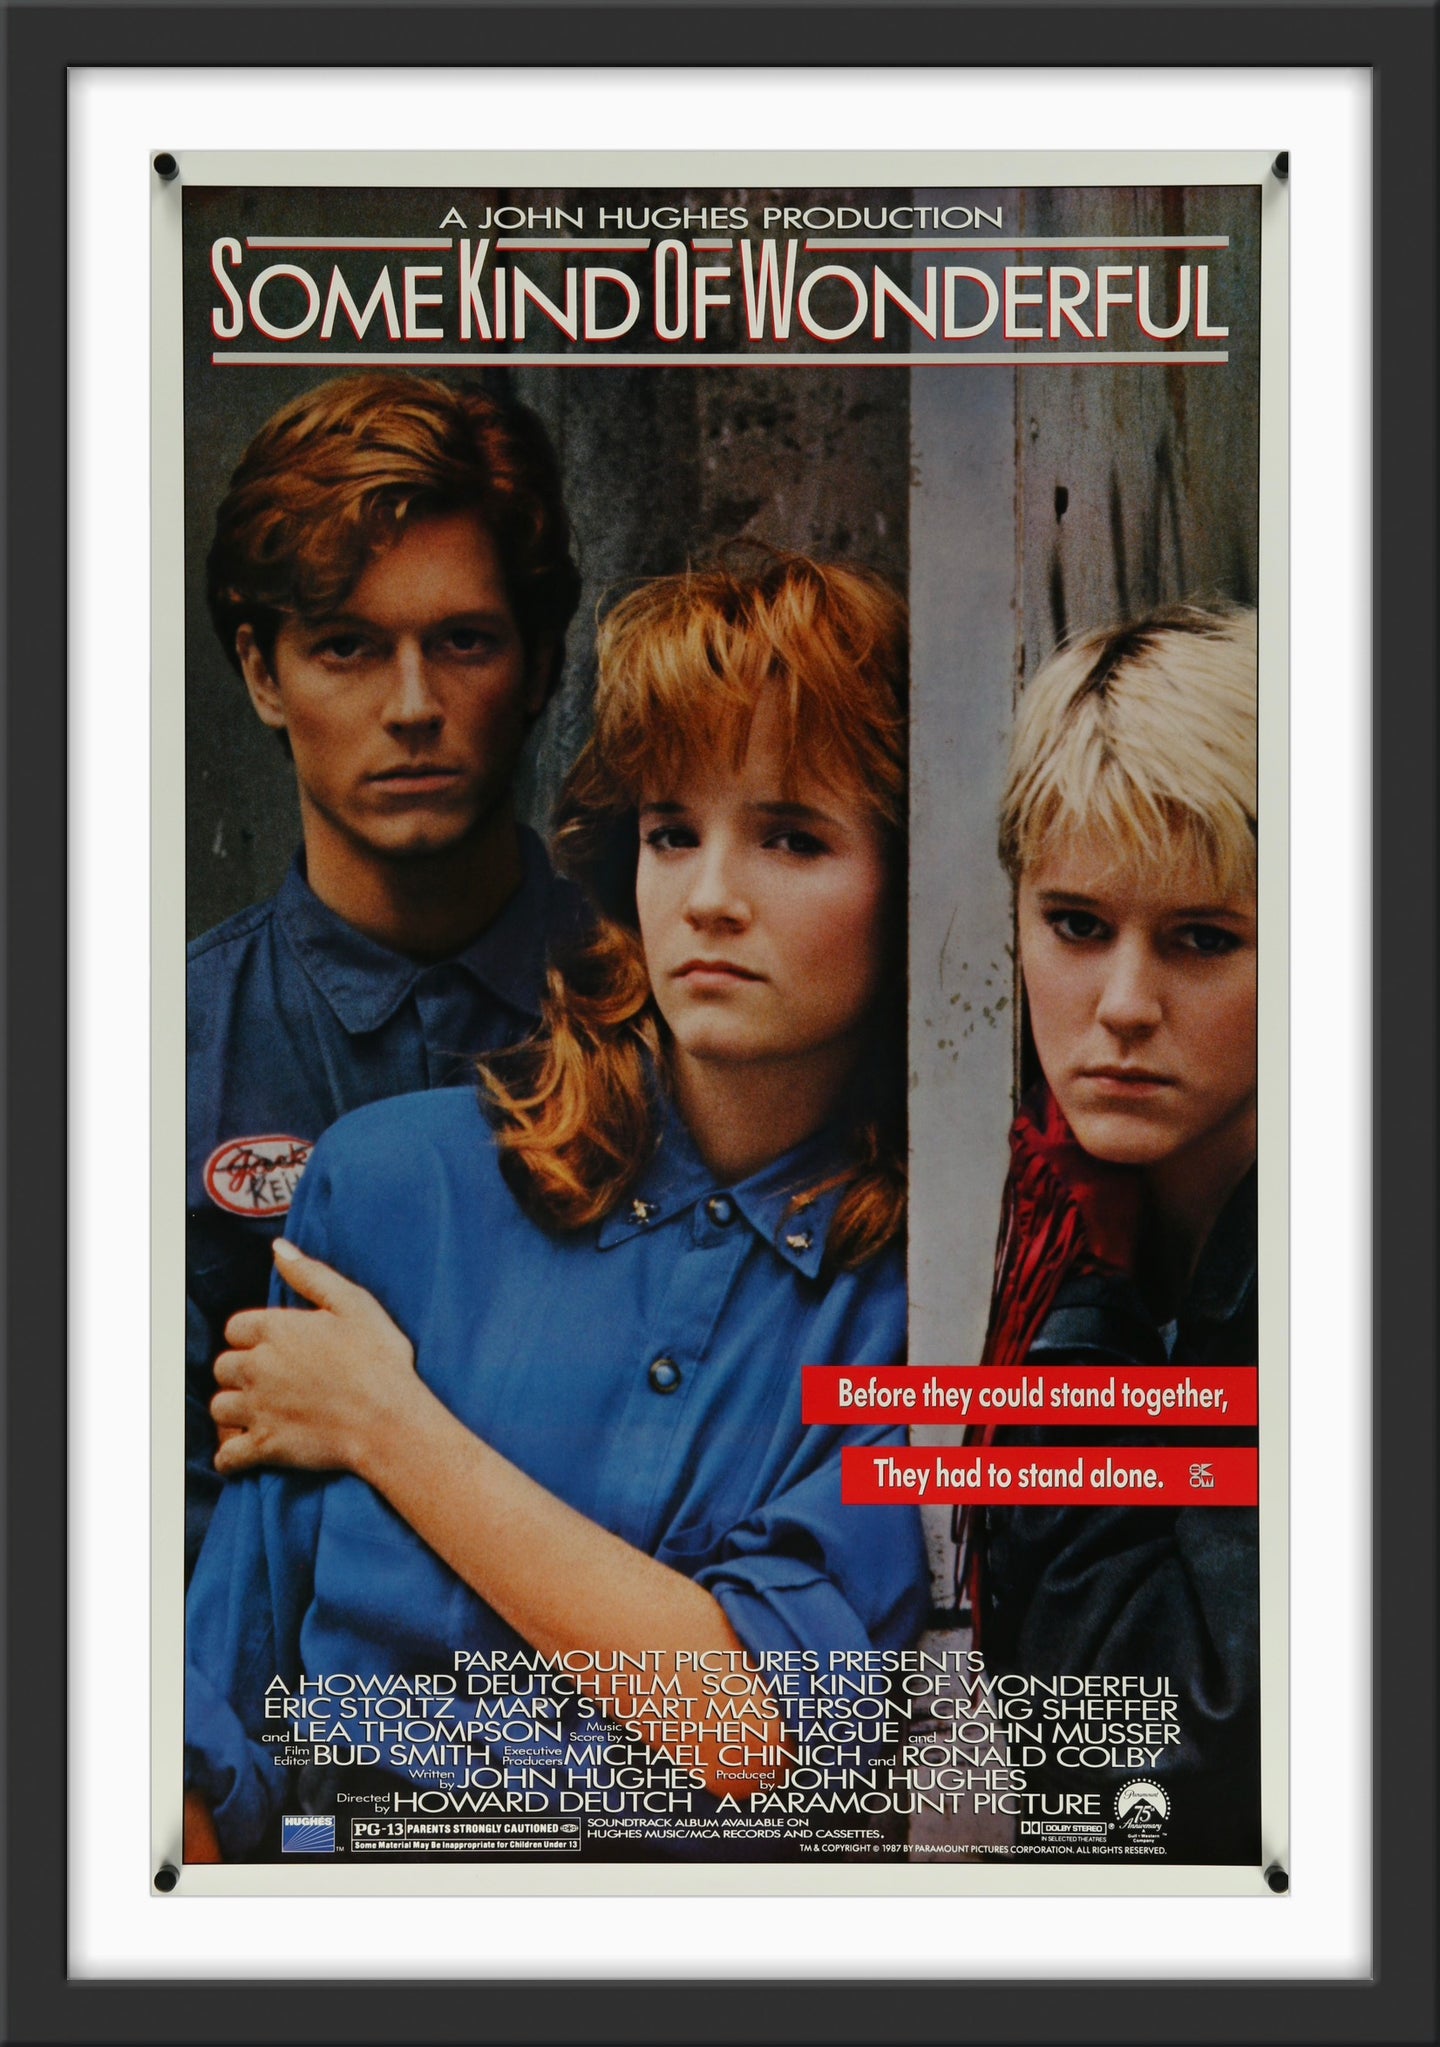 An original movie poster for the film Some Kind Of WOnderful